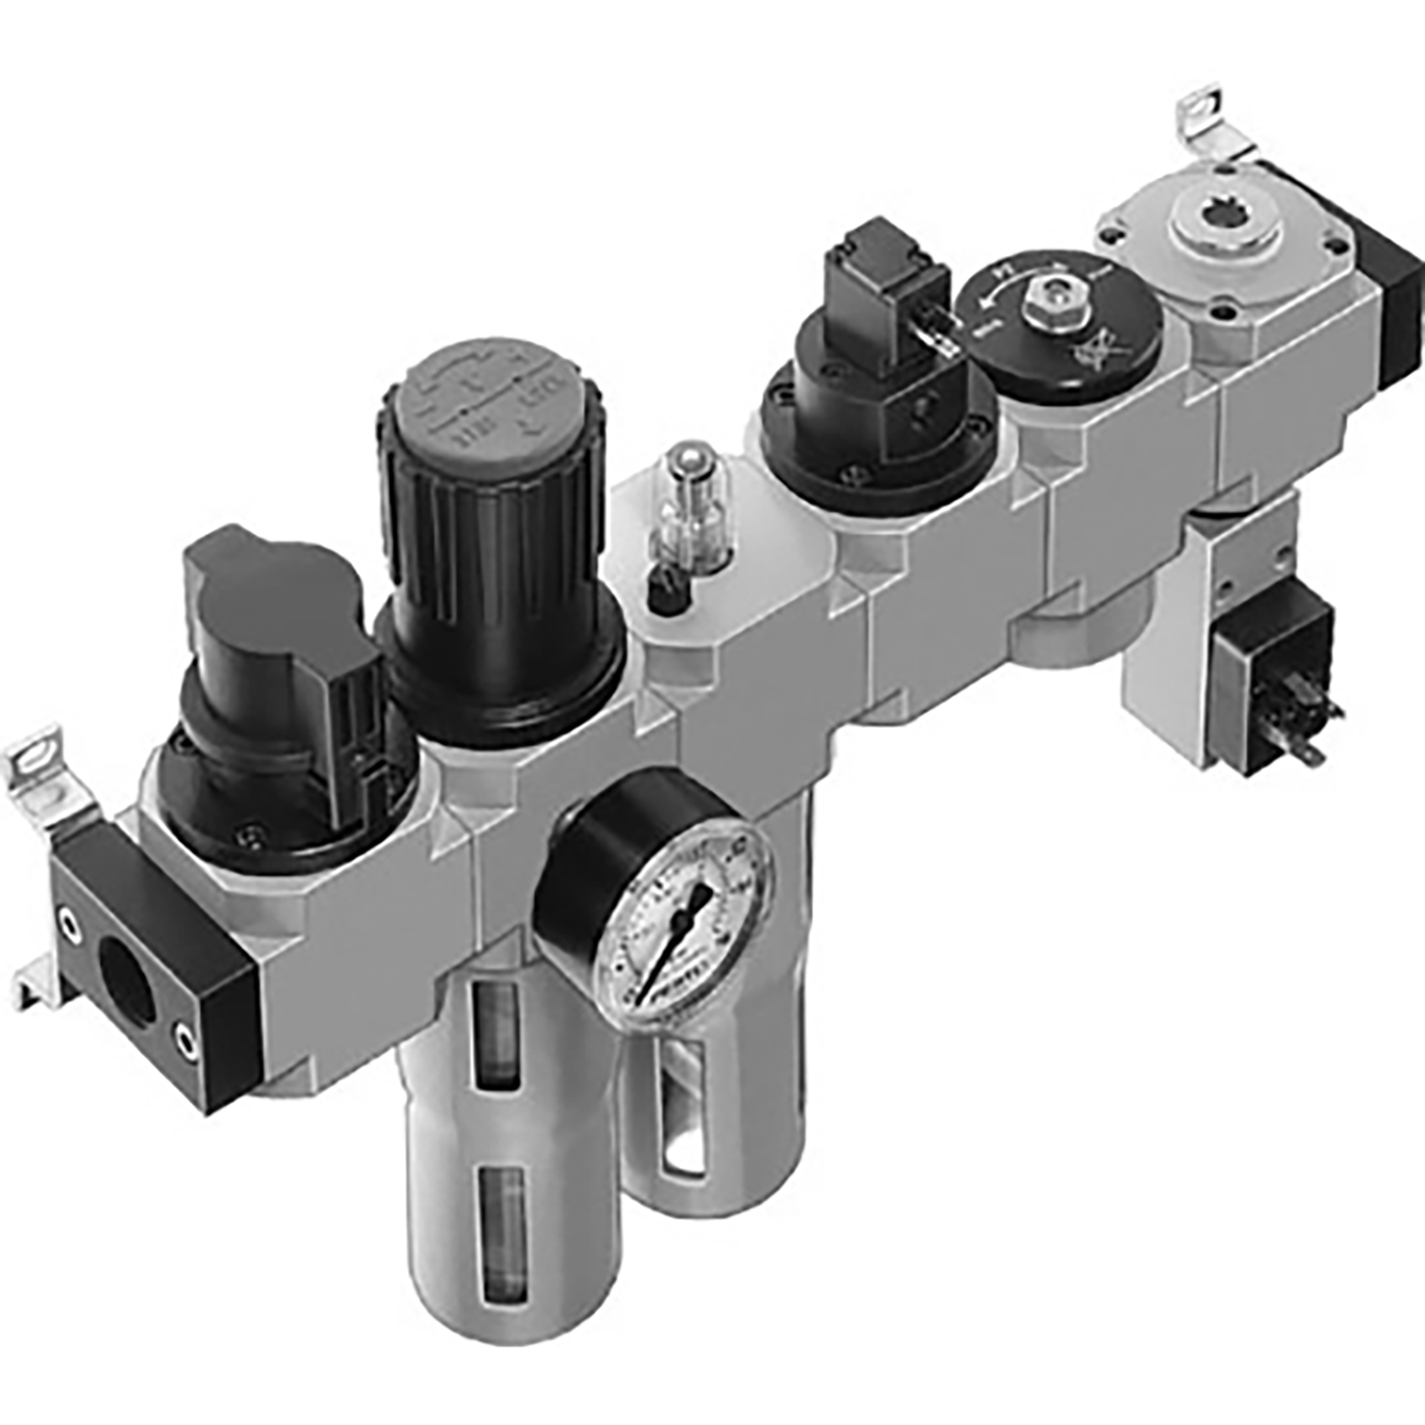 1/2" Service Unit Consisting of Manual On/Off Valve